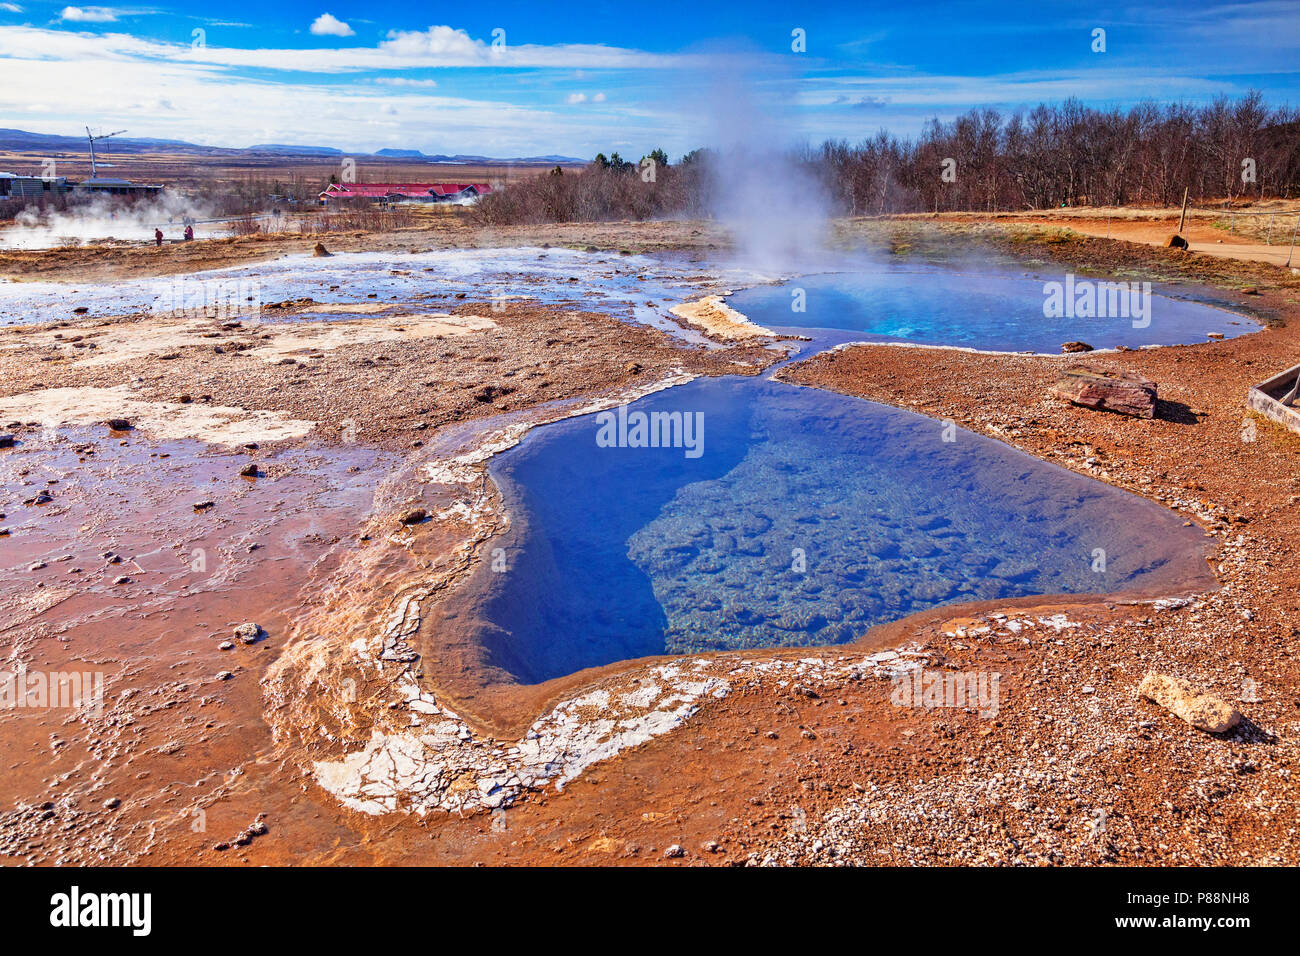 20 April 2018: Geysir, Iceland - Hot springs steaming on a fine spring day. Stock Photo